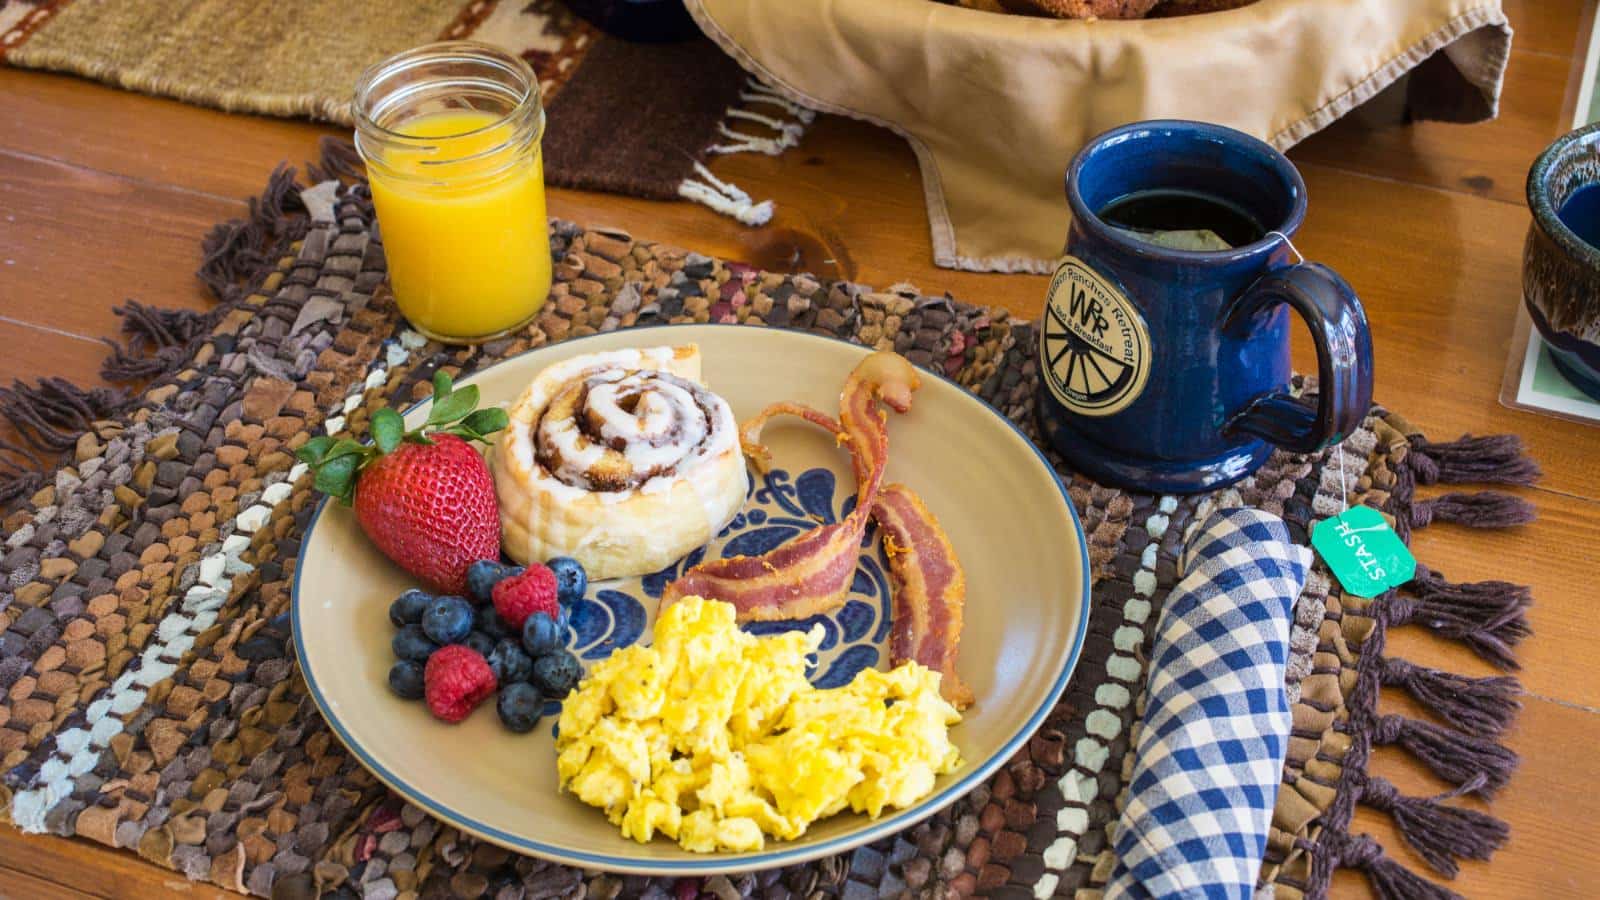 Close up view of light tan plate with scrambled eggs, bacon, cinnamon roll, and fruit